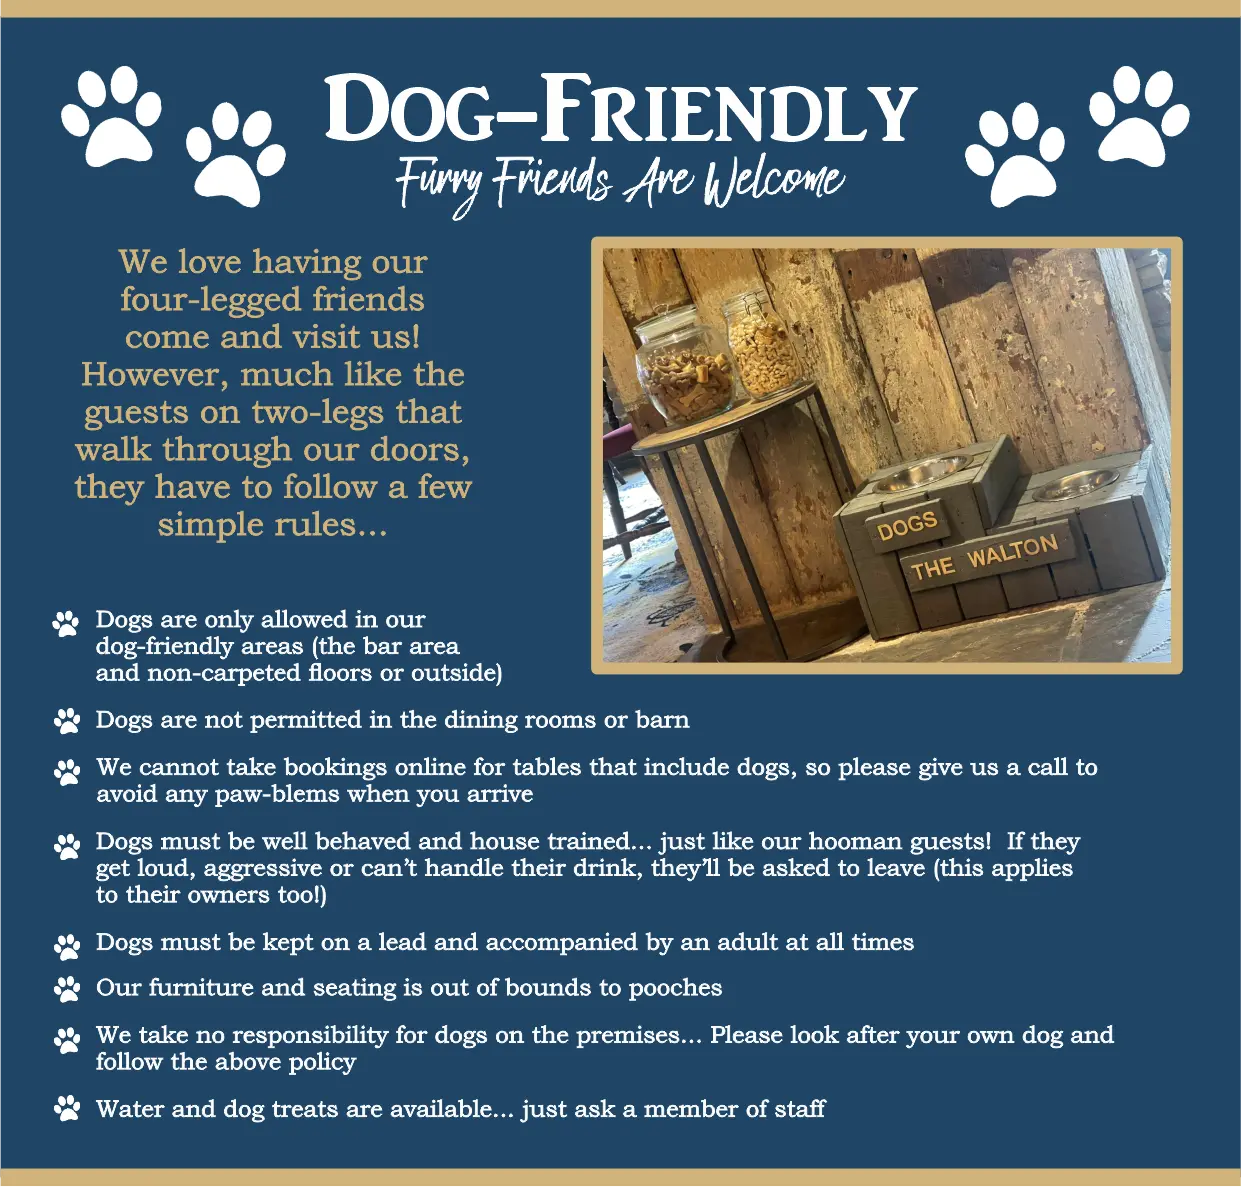 Dog Friendly - We love when our four legged friends come to visit - there's just a few simple rules to follow